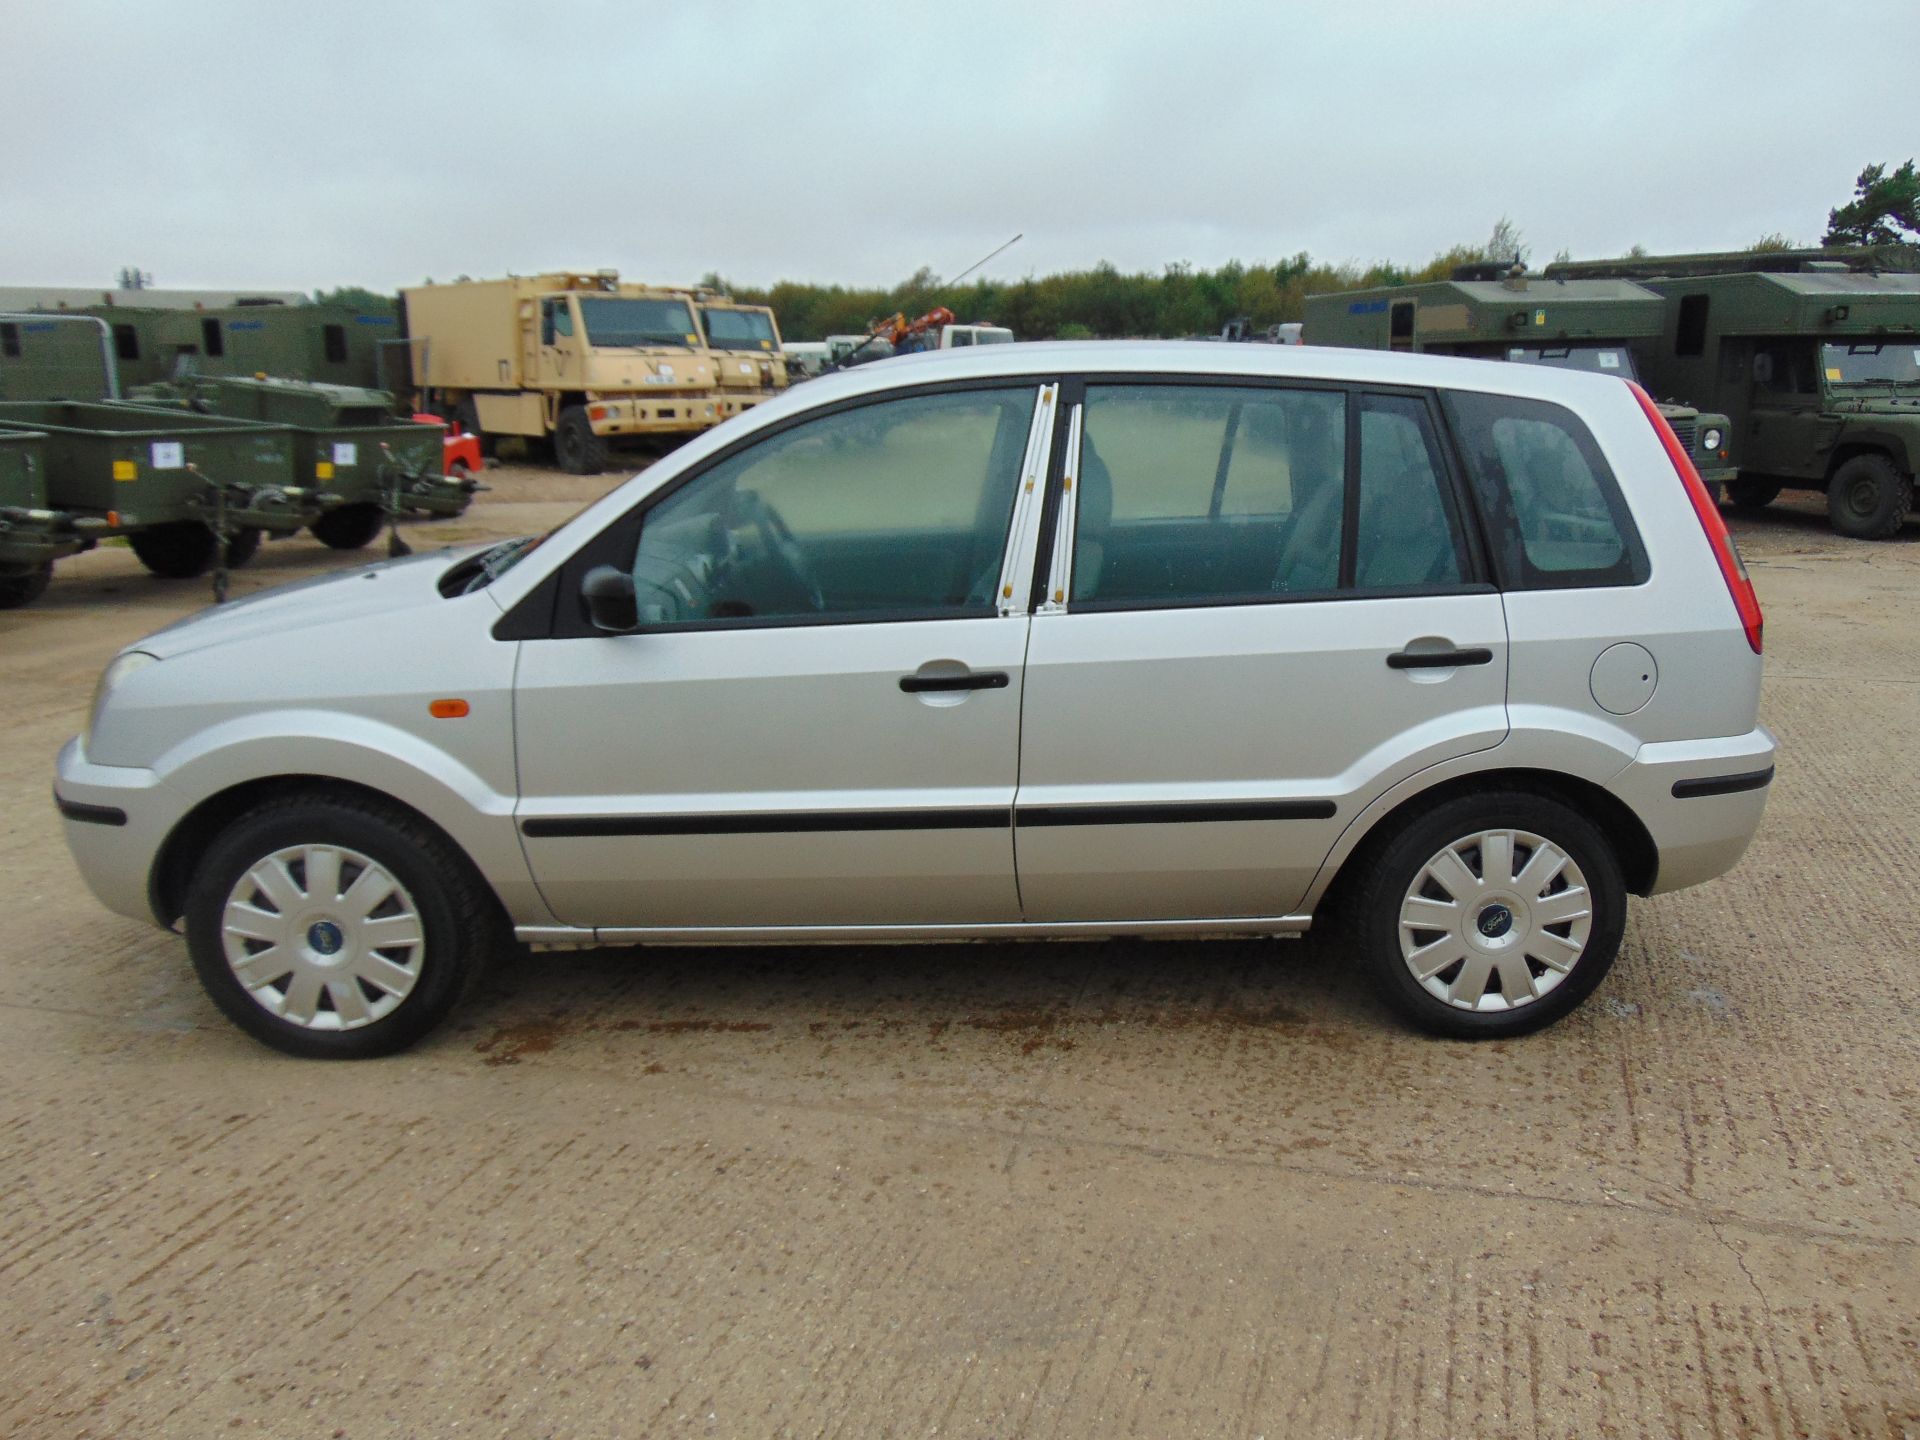 Ford Fusion 1.4 TDCi - Image 4 of 17